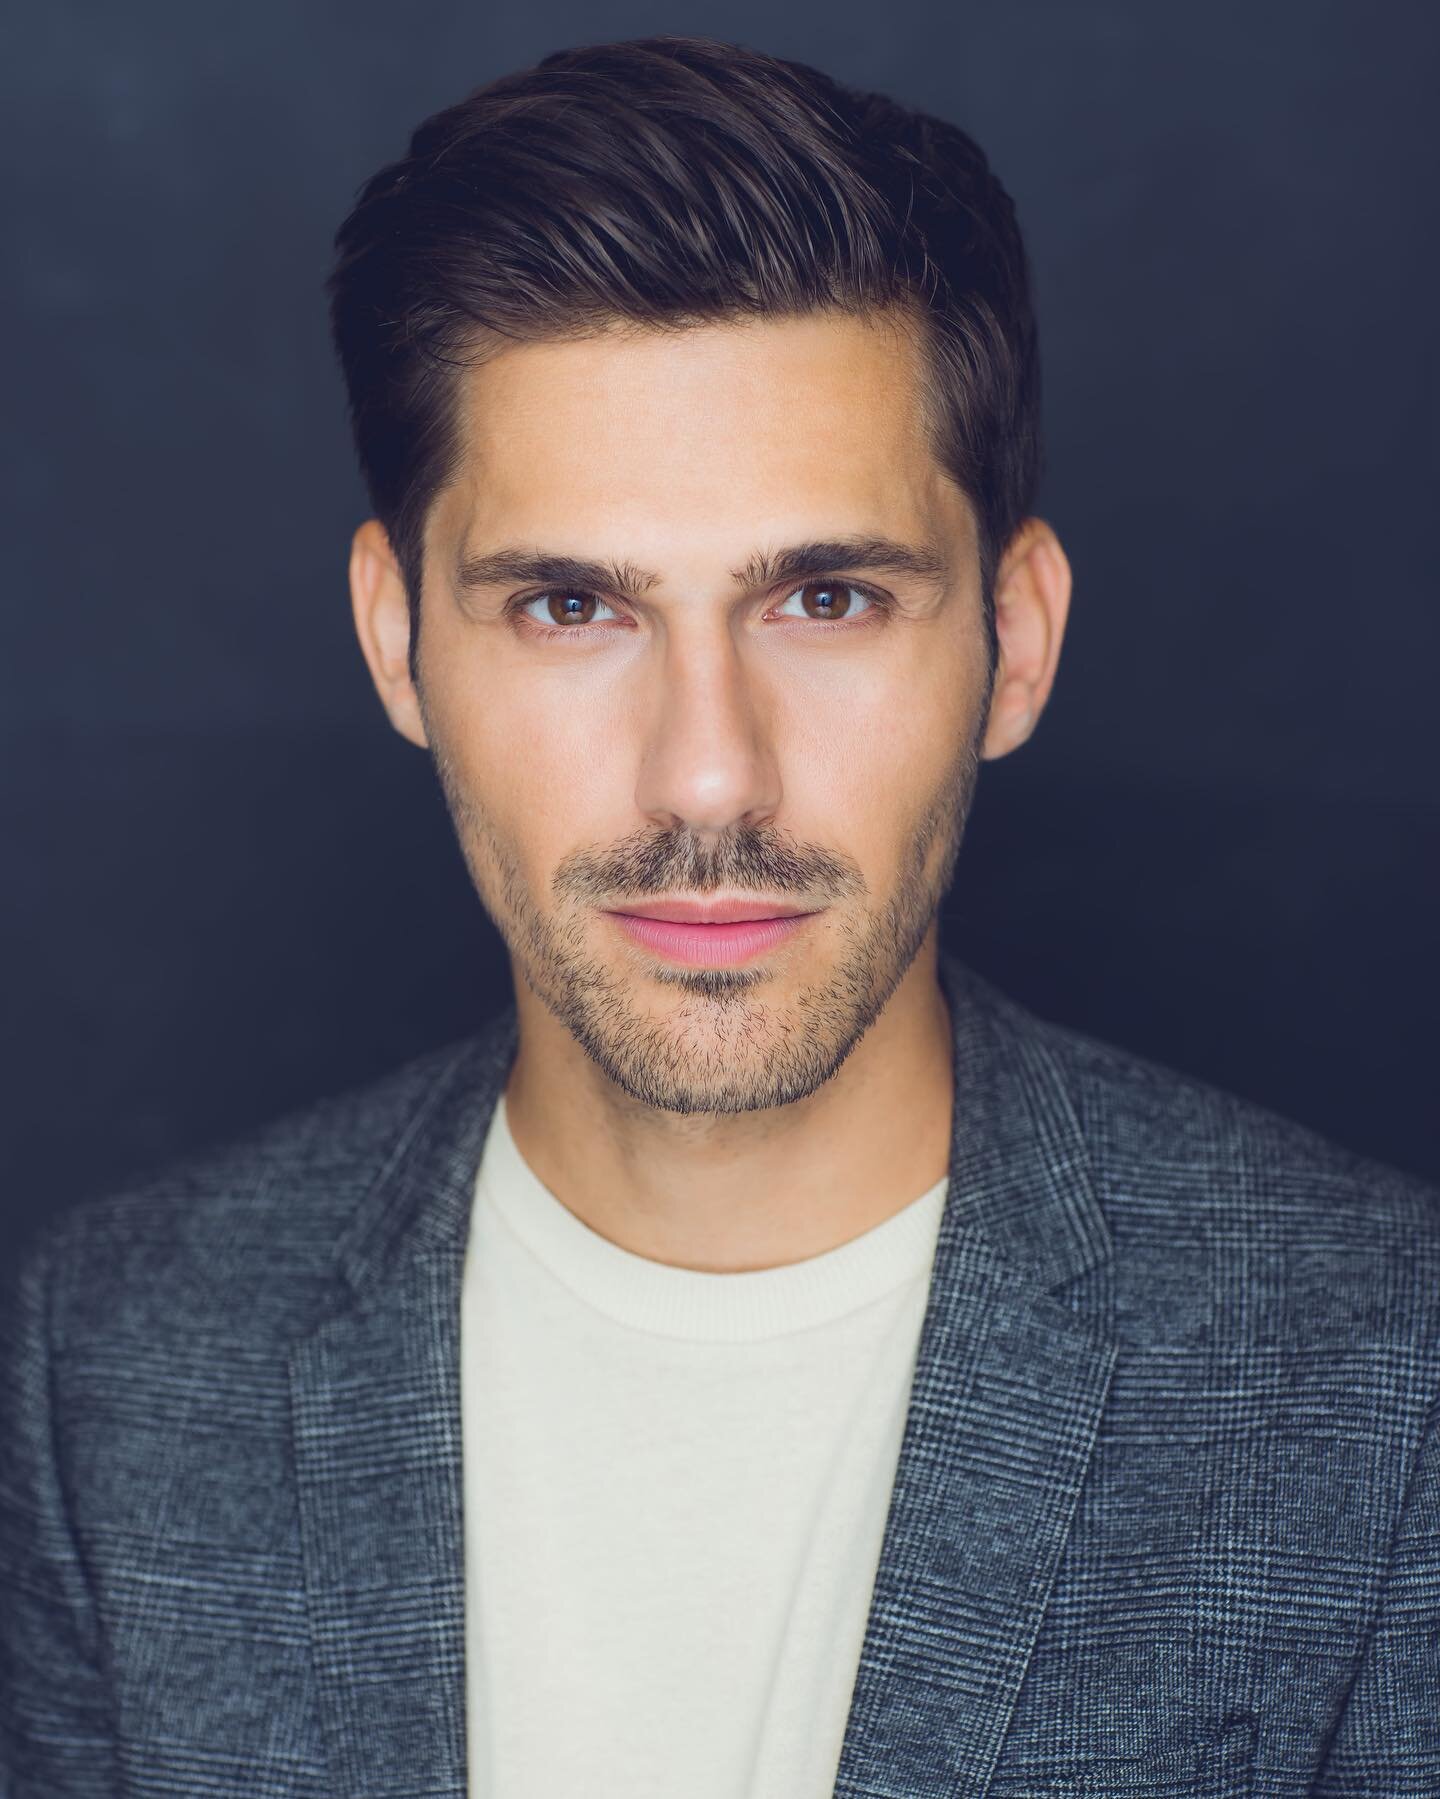 Suited up - New headshots by the talented @studiococonyc 

#actor #singer #dancer #performer #headshots
#Broadway #theatre #tv #film #casting #audition 
#model #malemodel 
#shoot #portrait #hair
#Paris #NYC #Brooklyn #French